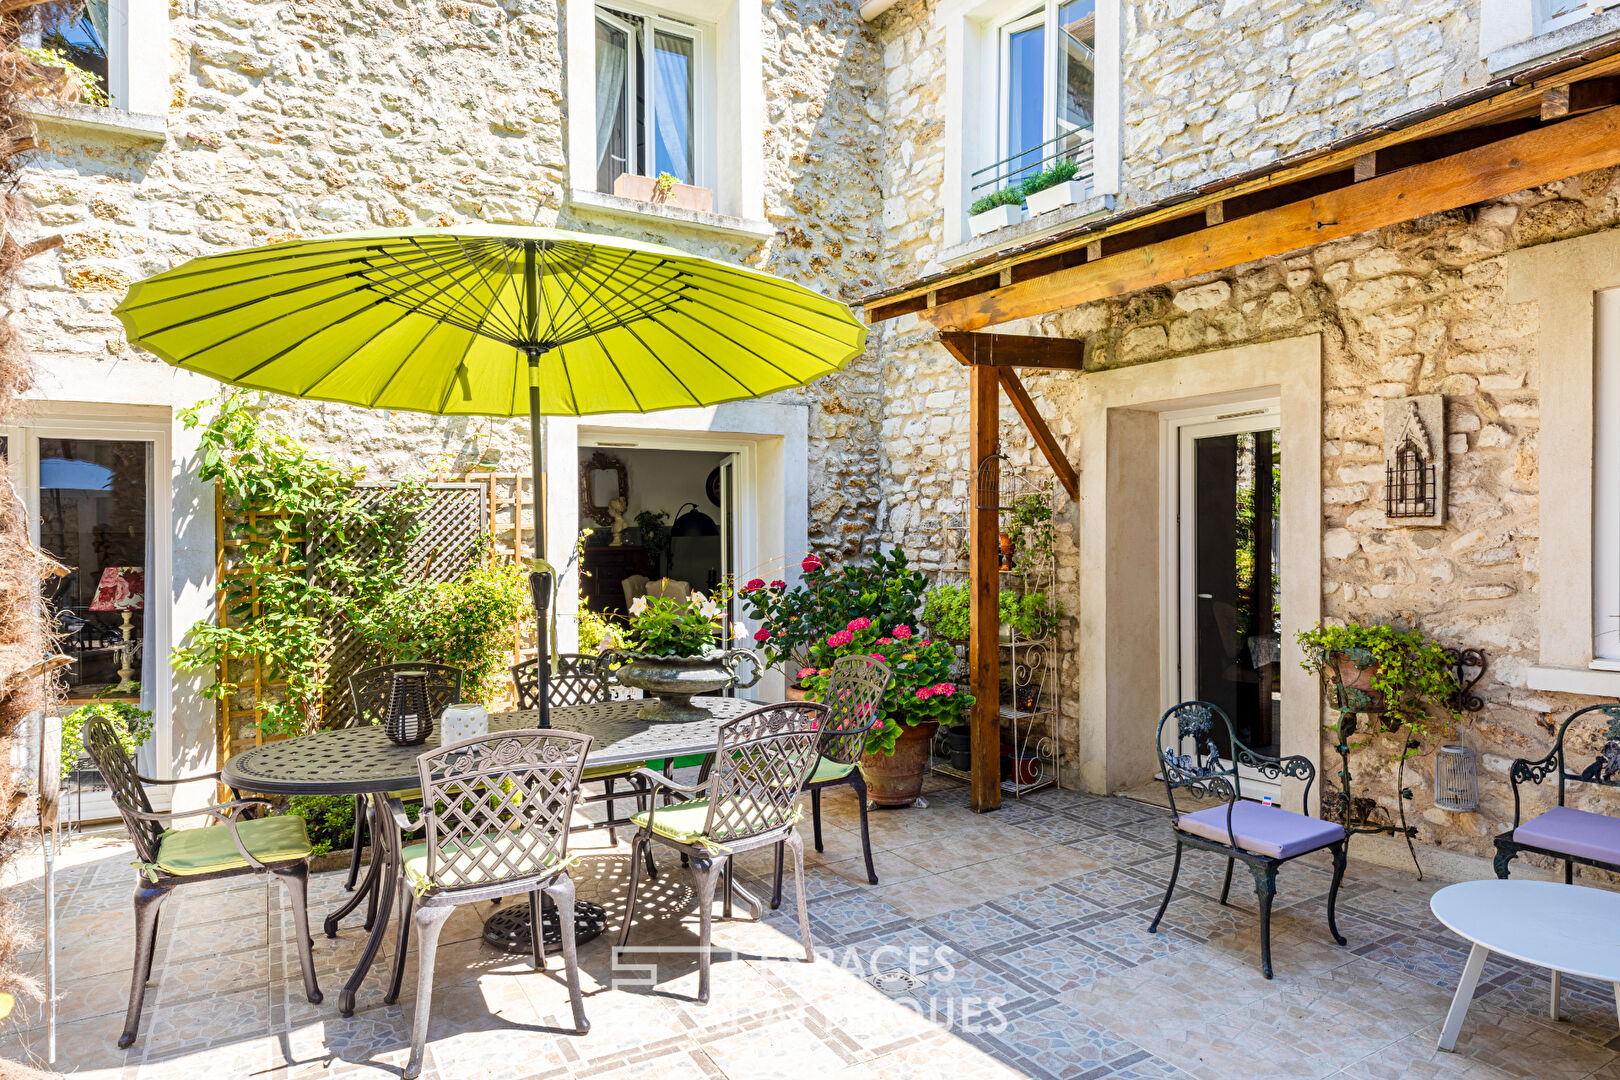 Explosion of charm in a sought-after hamlet near Guerville